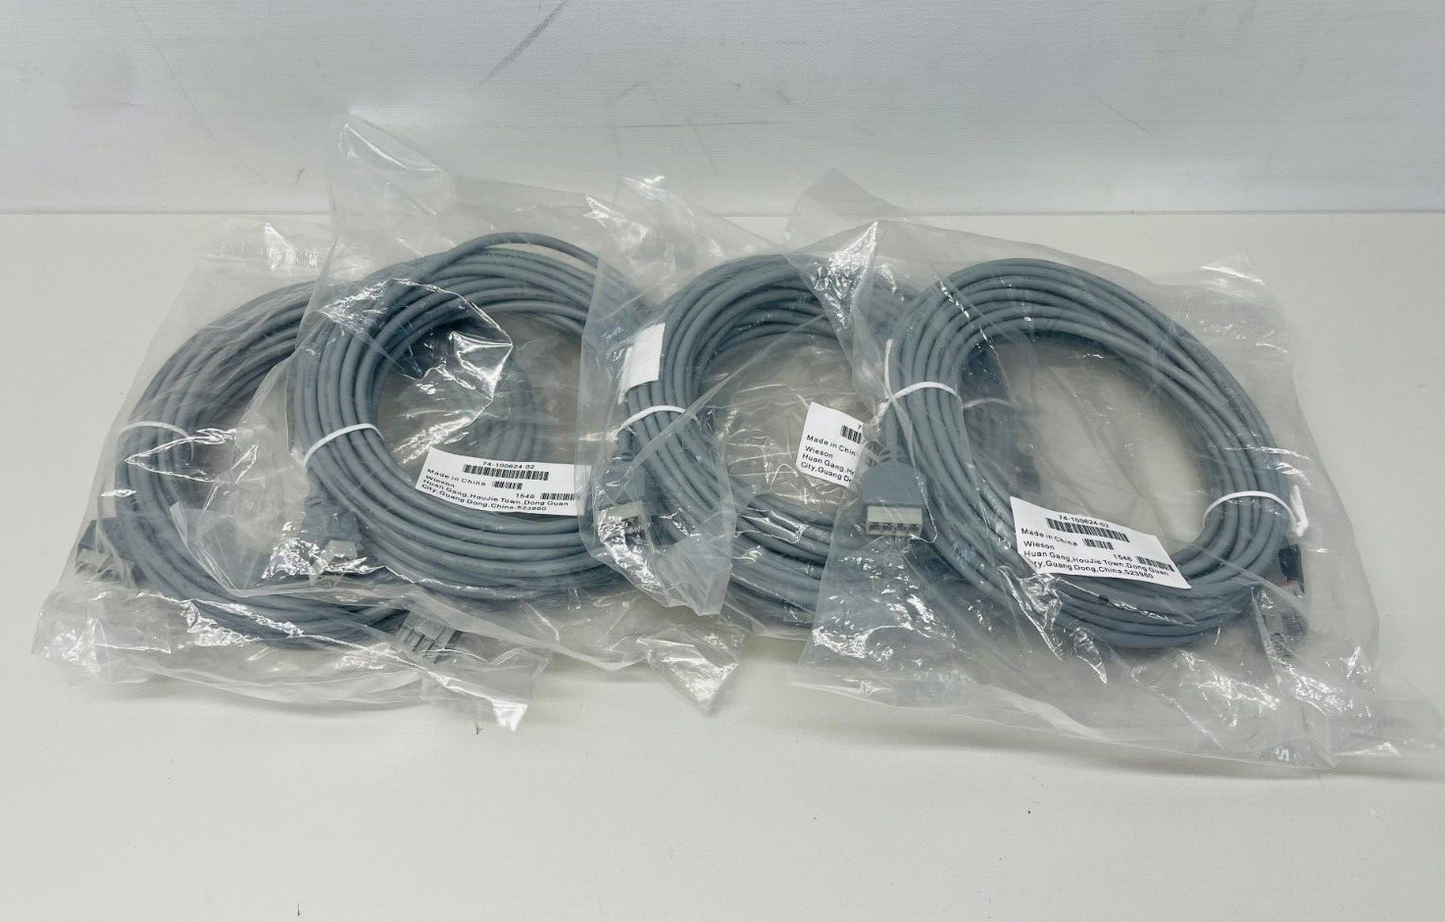 Cisco 74-100624-02 CAB-MIC-EXT-E Extension Cable 9m TableMicrophone / LOT OF 4